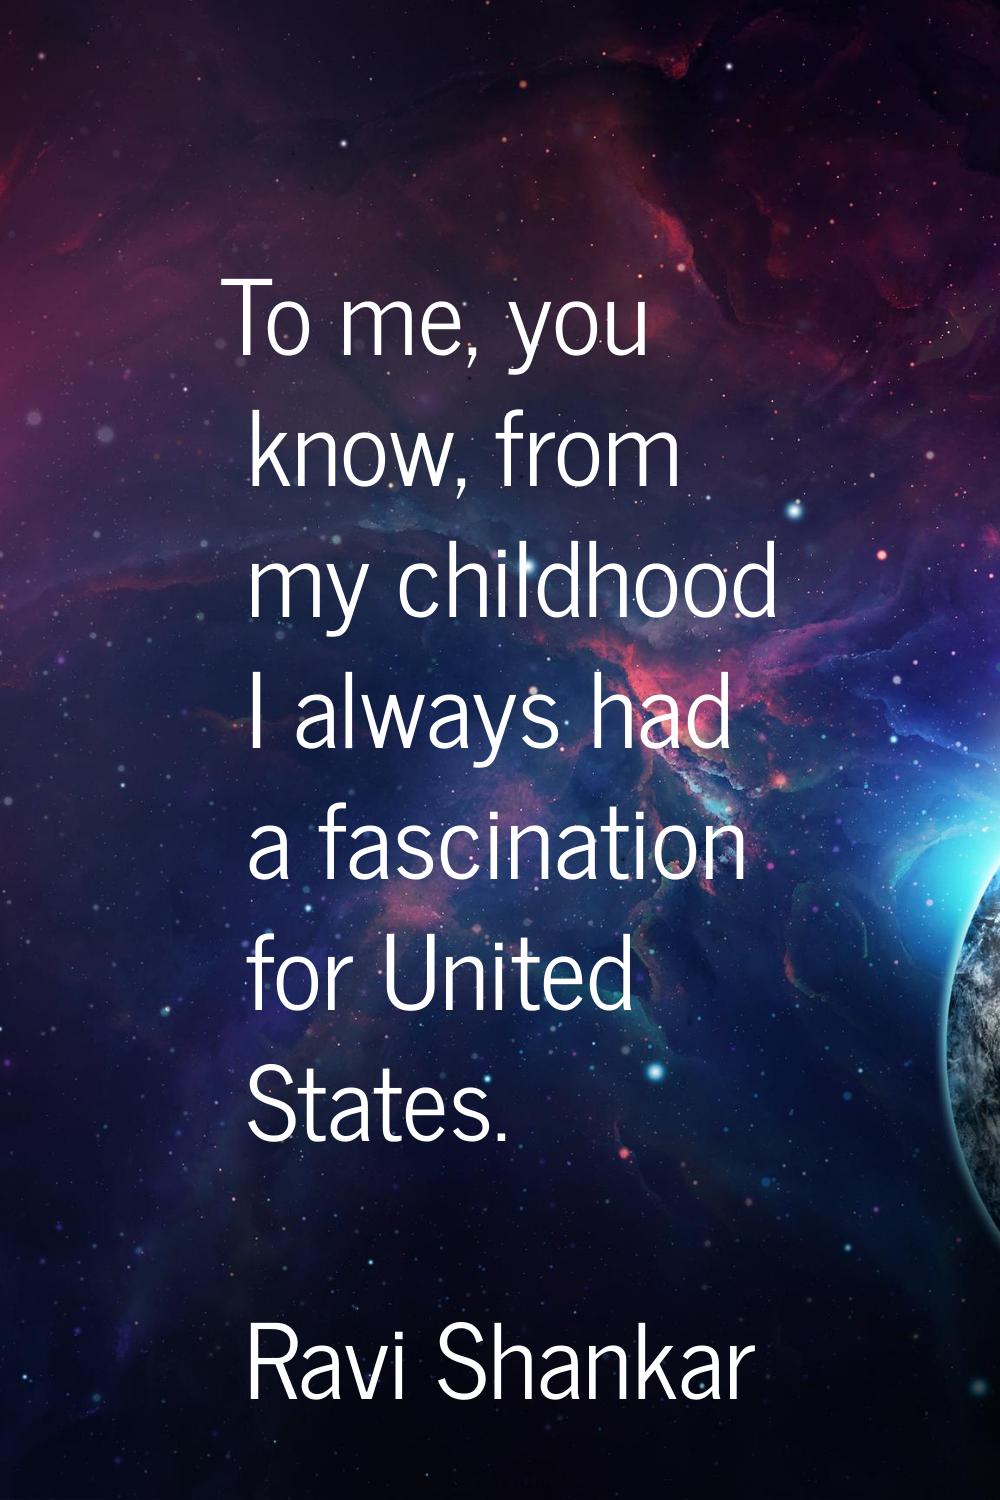 To me, you know, from my childhood I always had a fascination for United States.